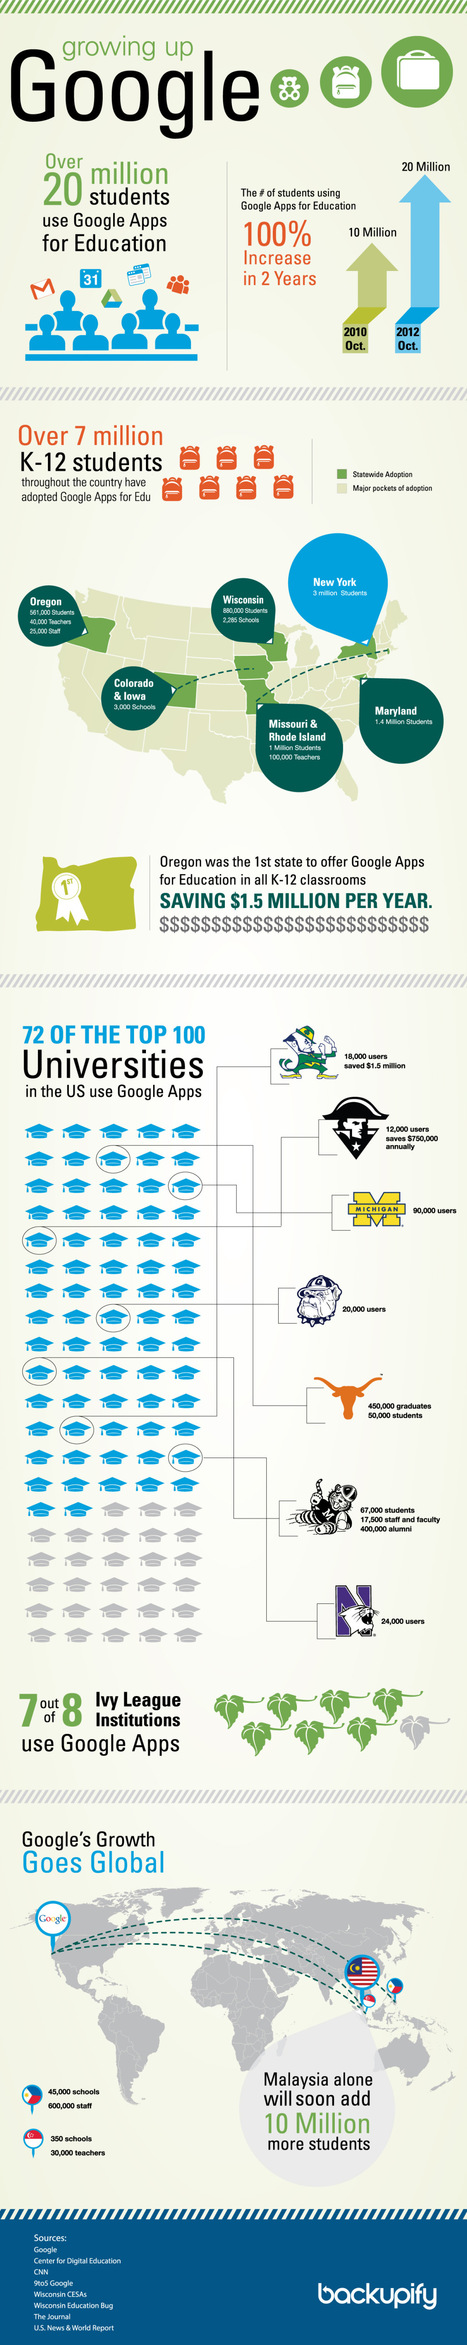 Schooled by Google: How Google Apps is penetrating education [infographic] | maestro Julio | Scoop.it